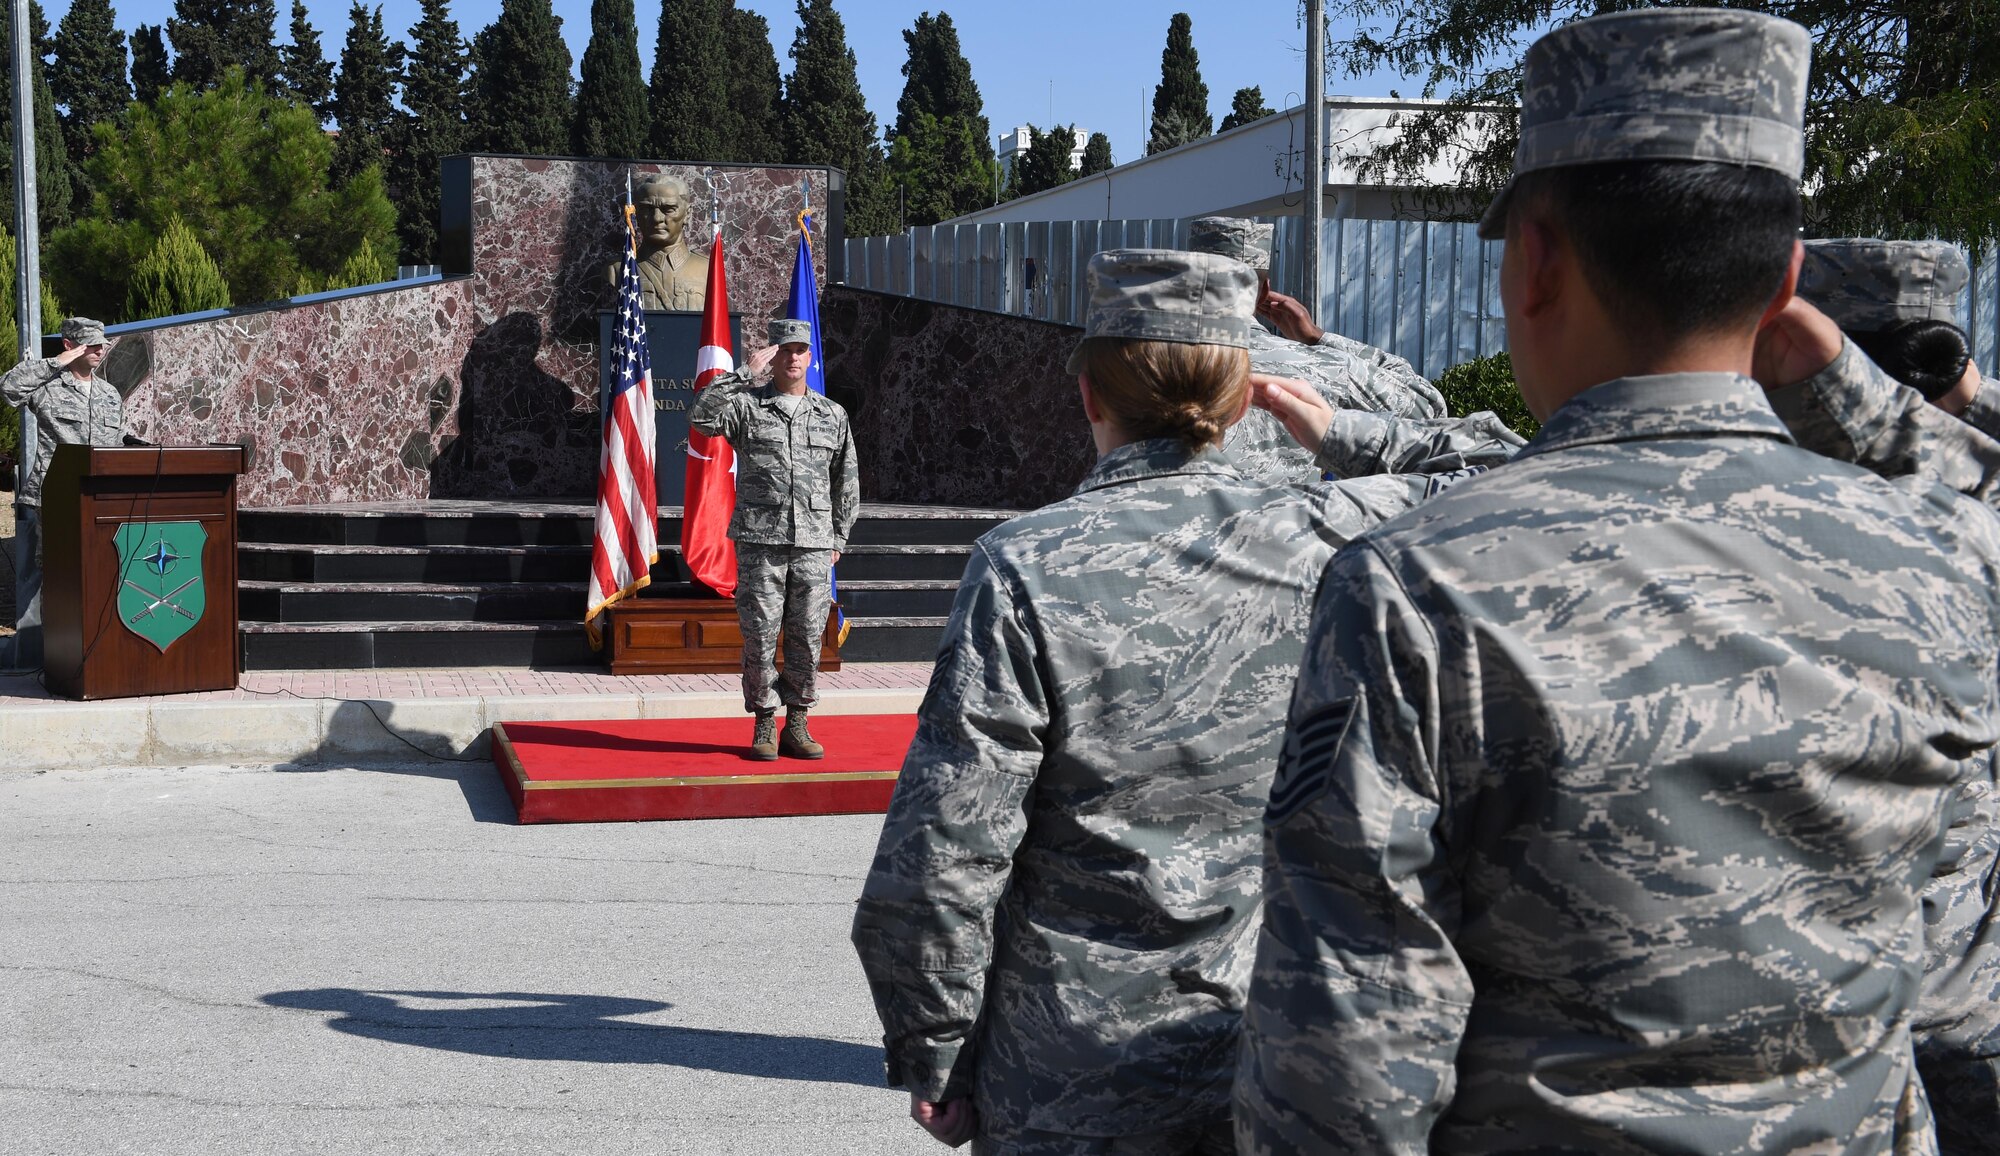 Airmen assigned to the 425th Air Base Squadron render a salute to Lt. Col. Christopher Collins, incoming 425th ABS commander, during an Assumption of Command at Izmir Air Station, Turkey, Sept. 18, 2017. Collins was previously assigned to the 451st Flying Training Squadron as a combat systems instructor. (U.S. Air Force photo by Senior Airman Jasmonet D. Jackson)